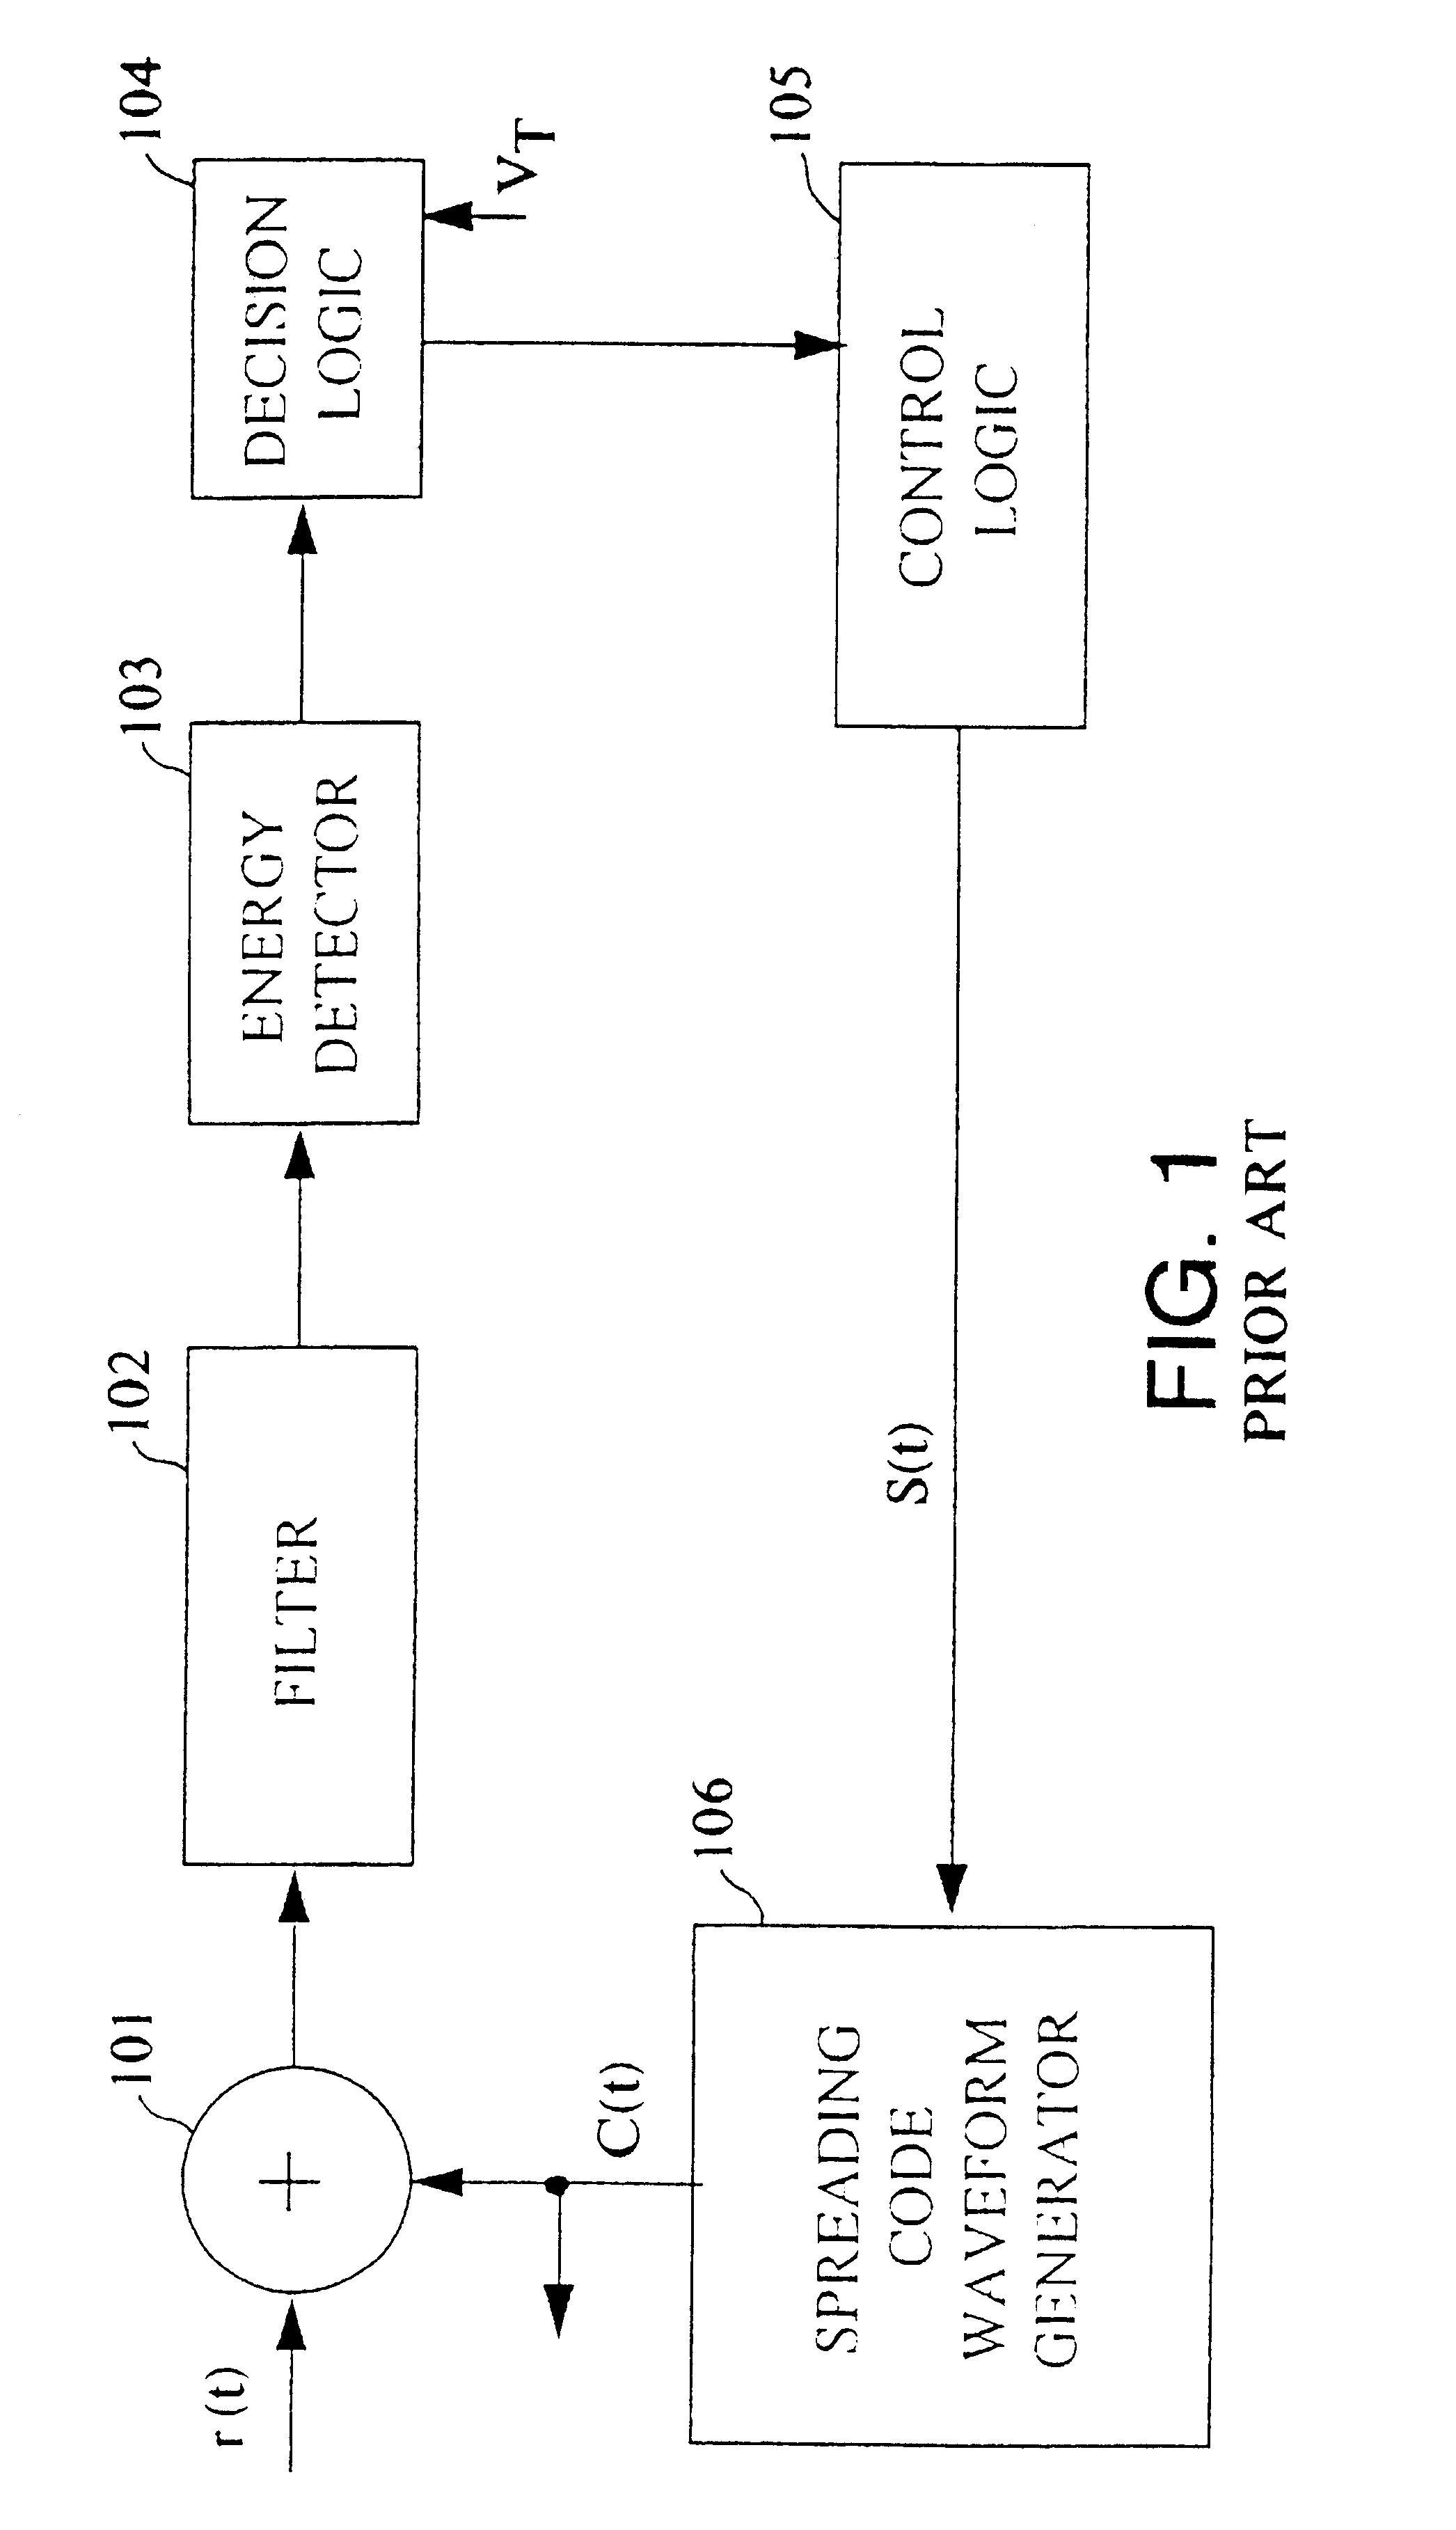 Spreading code sequence acquisition system and method that allows fast acquisition in code division multiple access (CDMA) systems